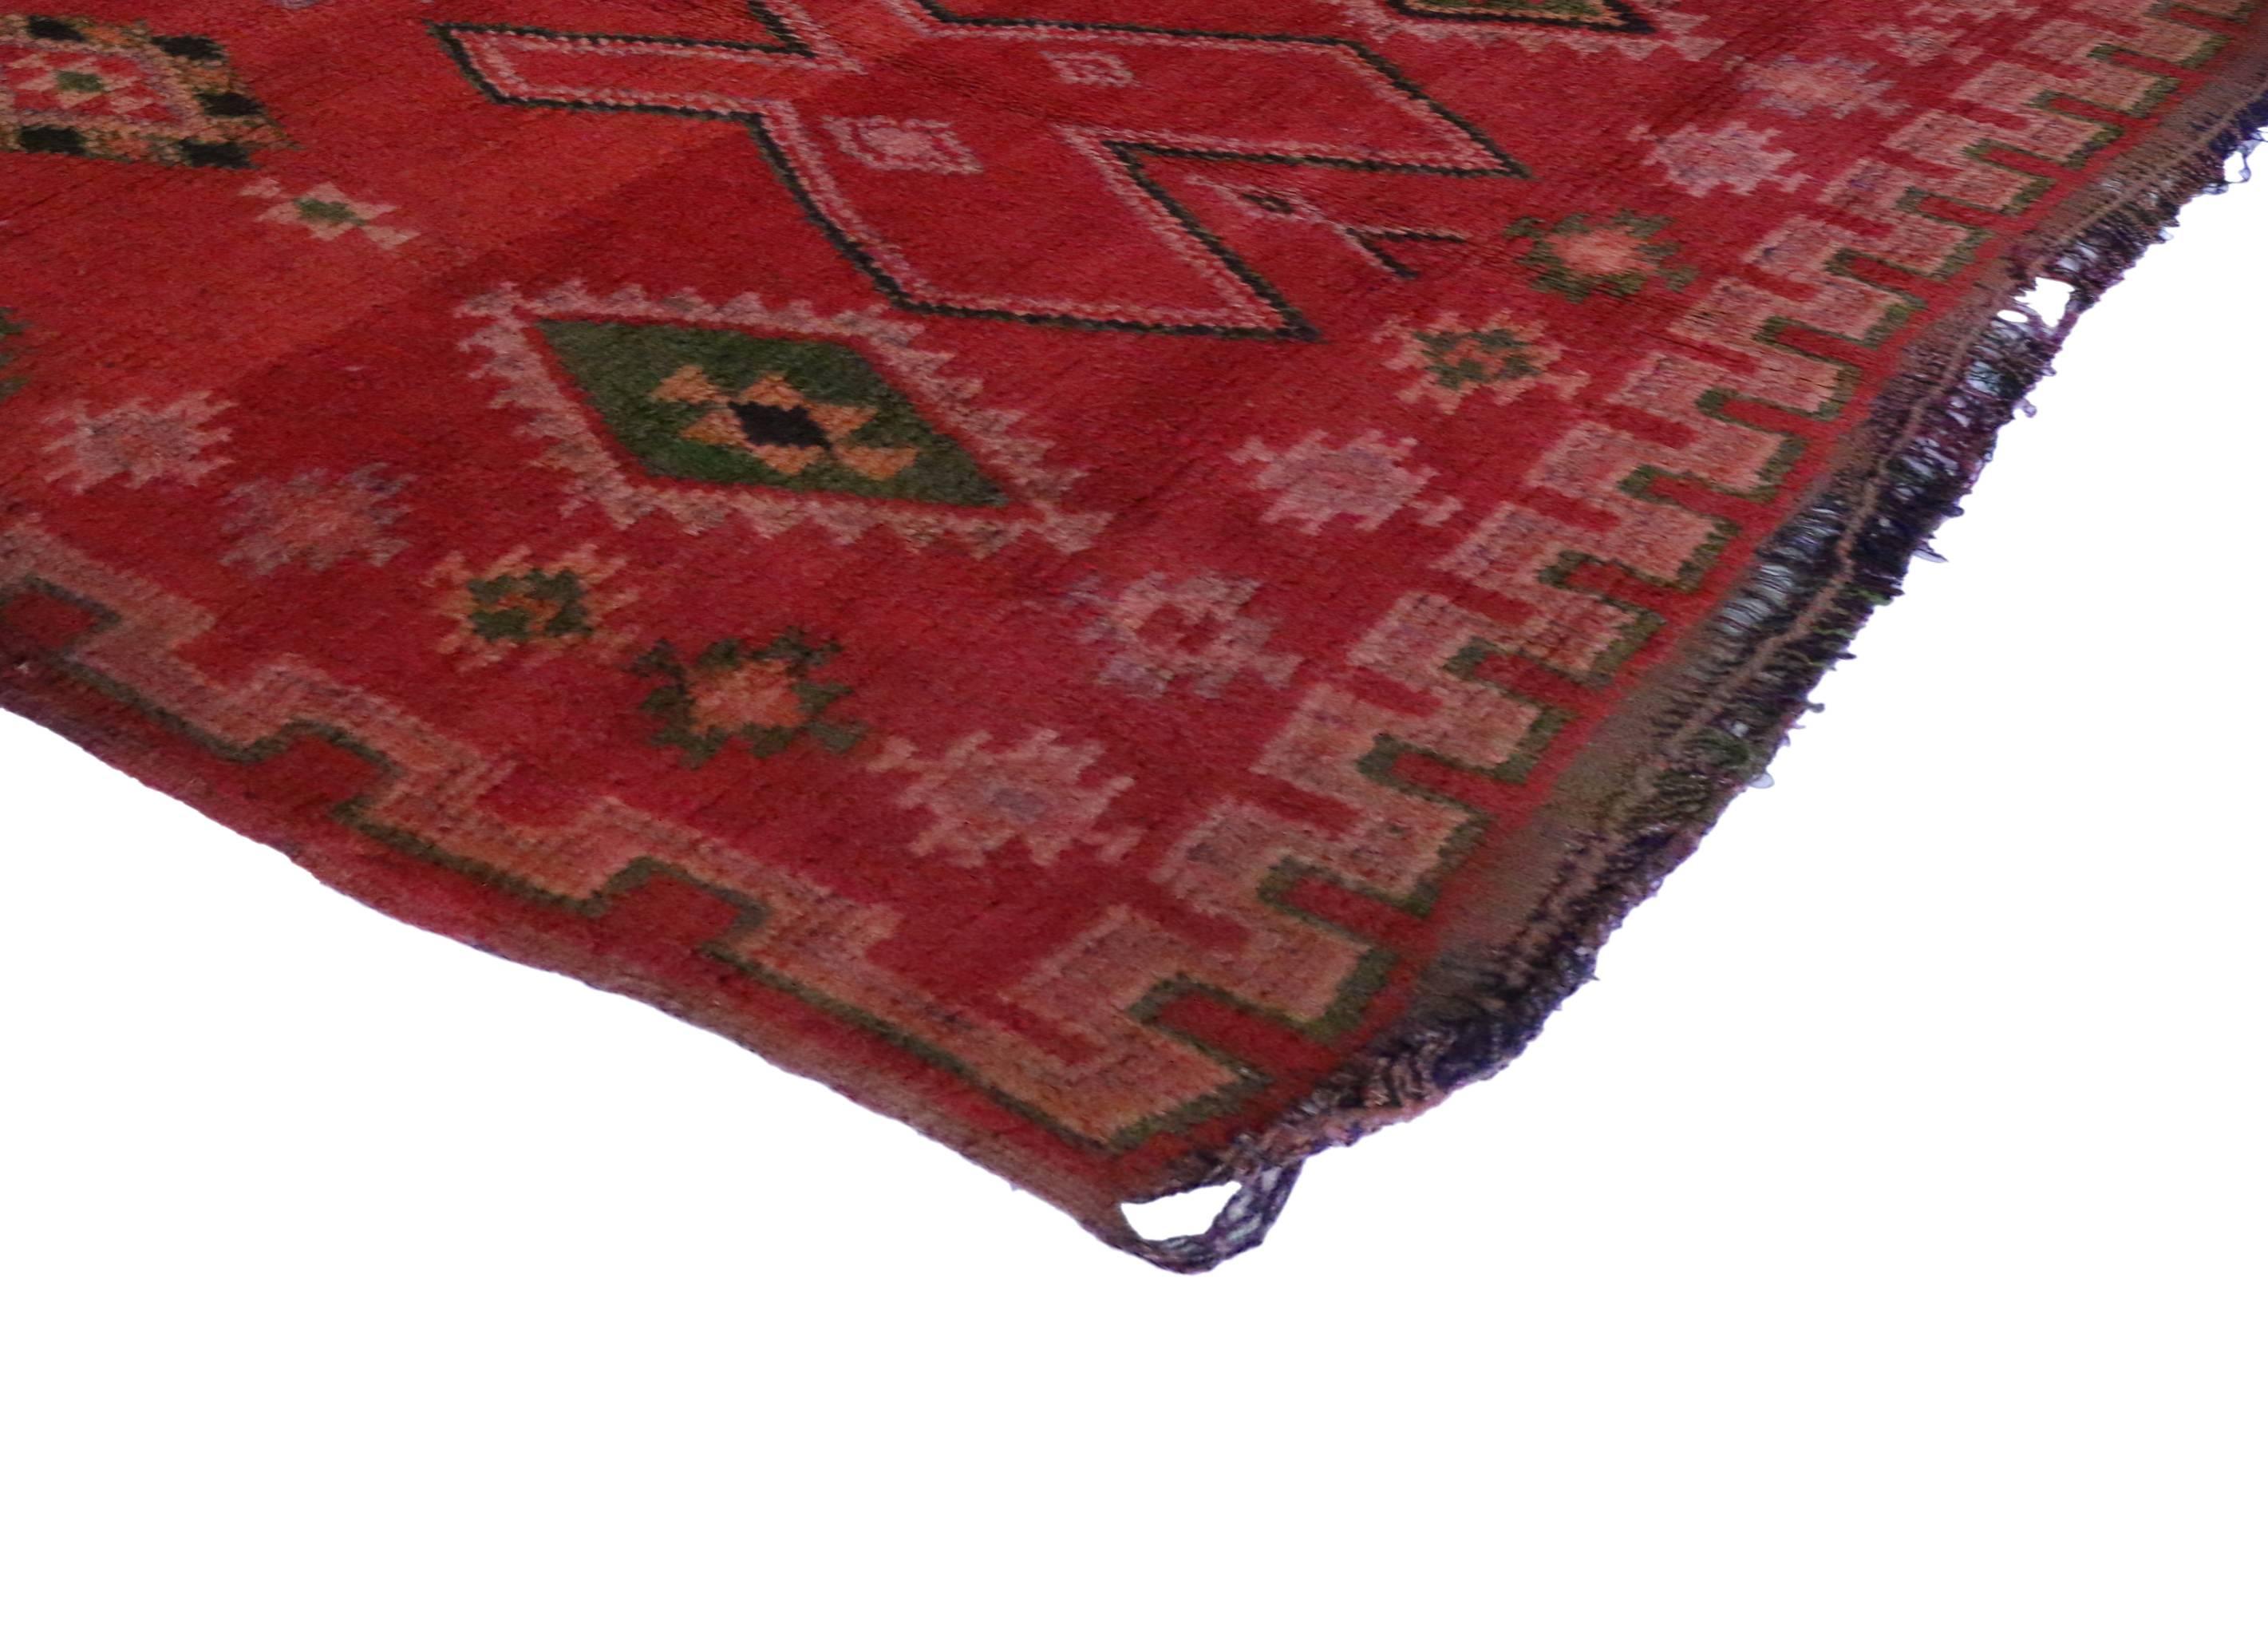 Saturated with good taste and a lively attitude, this vintage Berber Moroccan rug features modern tribal design. It is swathed in variegated shades of red, lavender, green, pink, beige, brown and black. Give your space a burst of sweet energy with